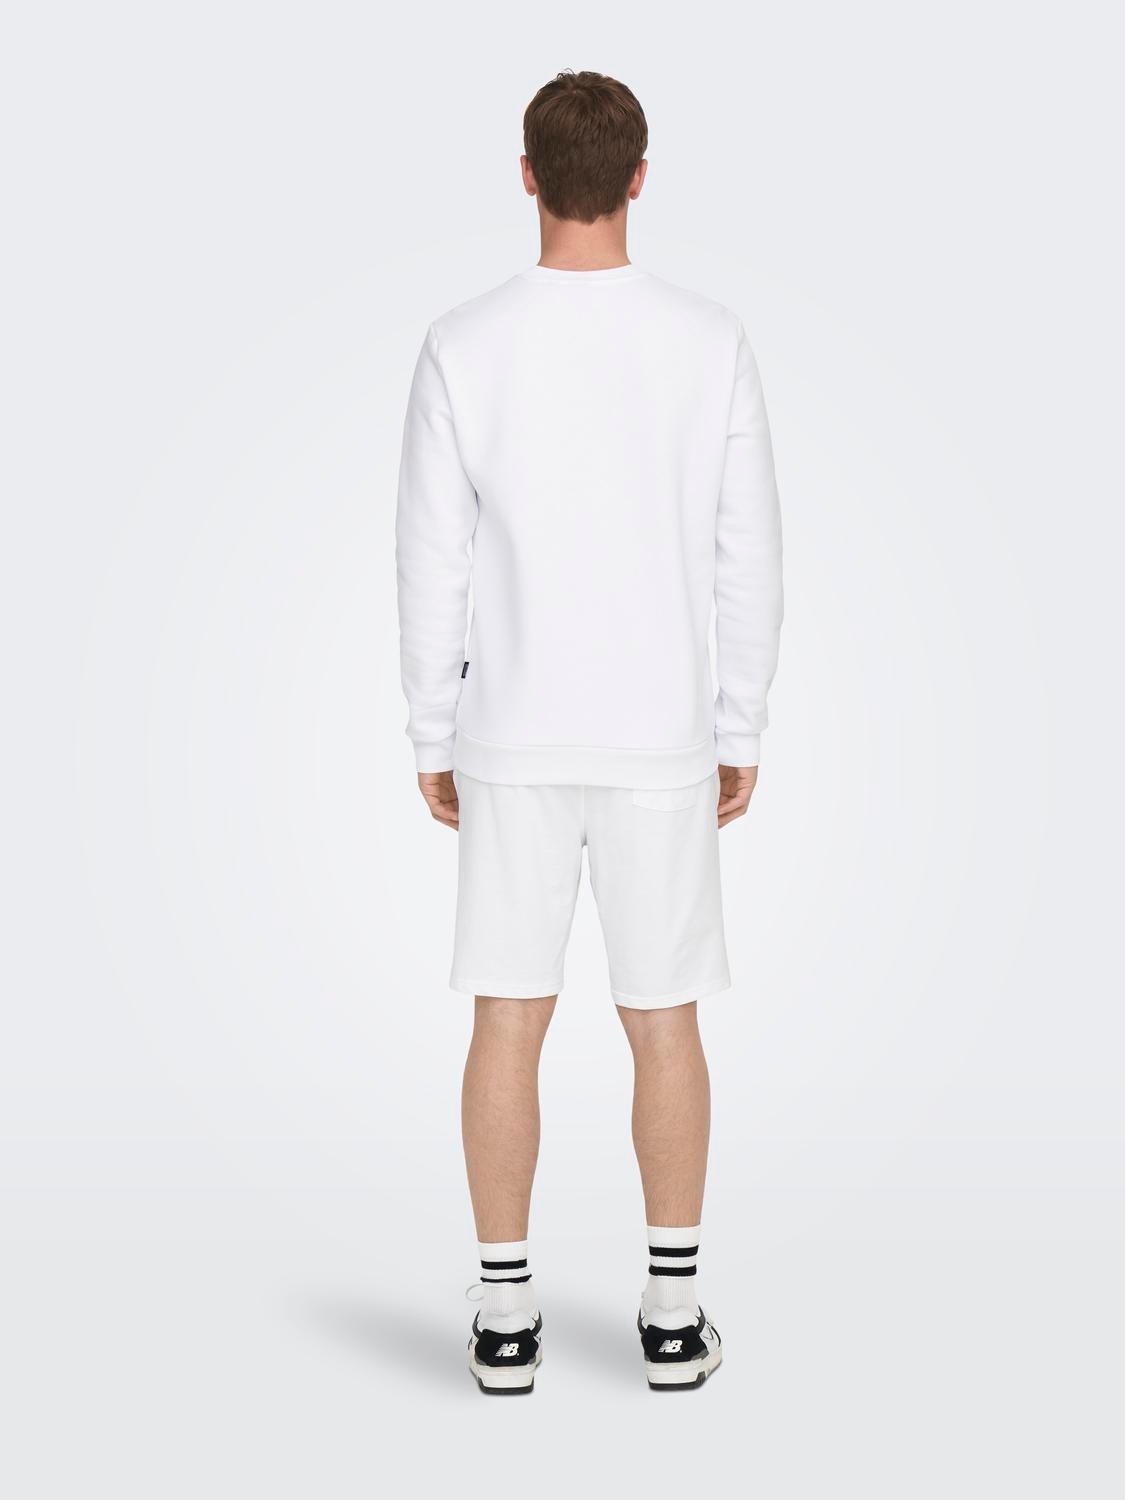 ONLY & SONS O-hals sweatshirt -Bright White - 22018683